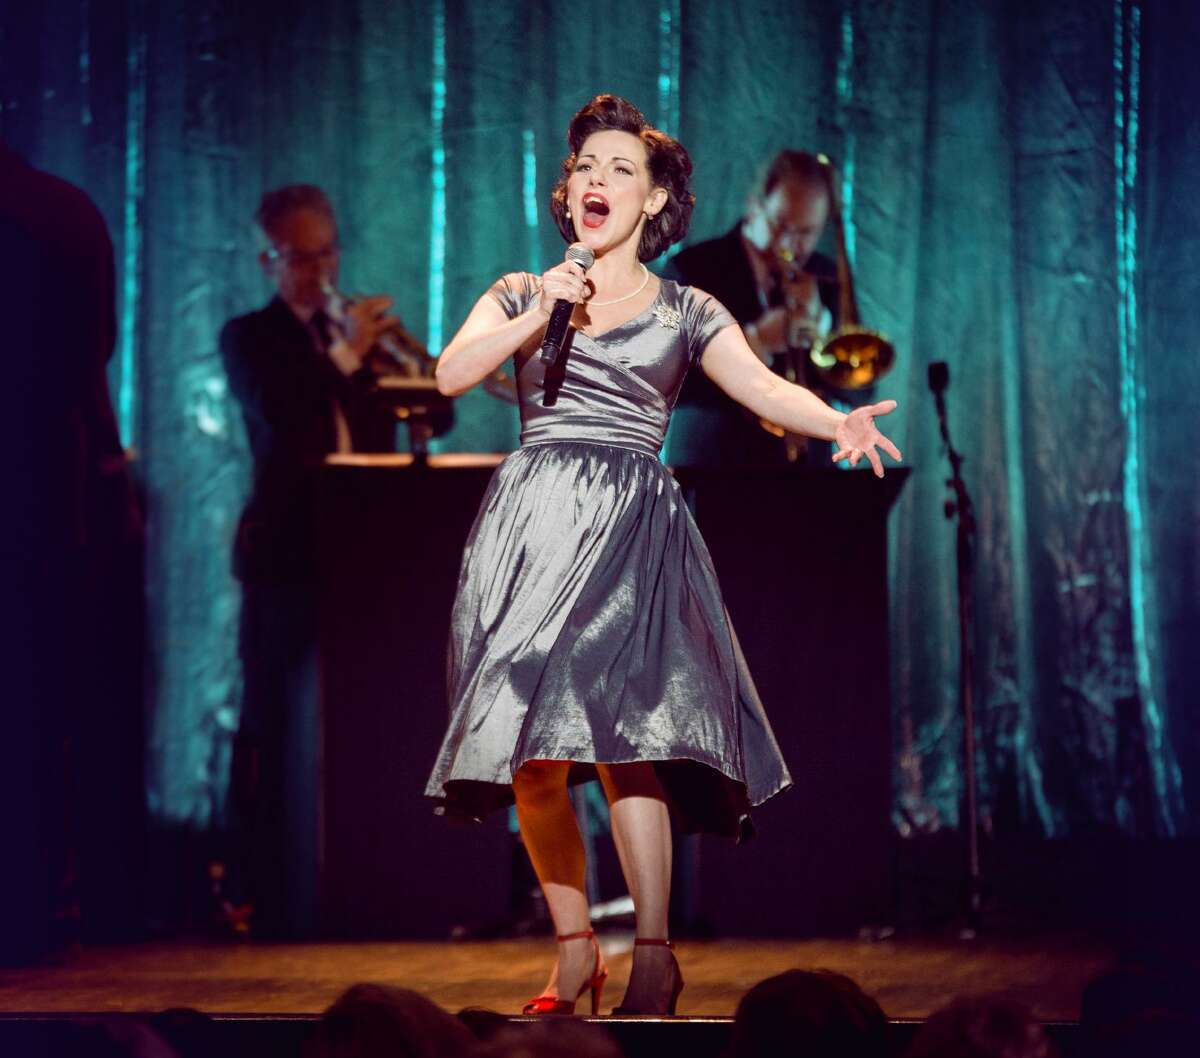 Angela Ingersoll Sings Judy Garland will be held on Monday, Feb. 25 at 7:30 p.m. at The George Theater.